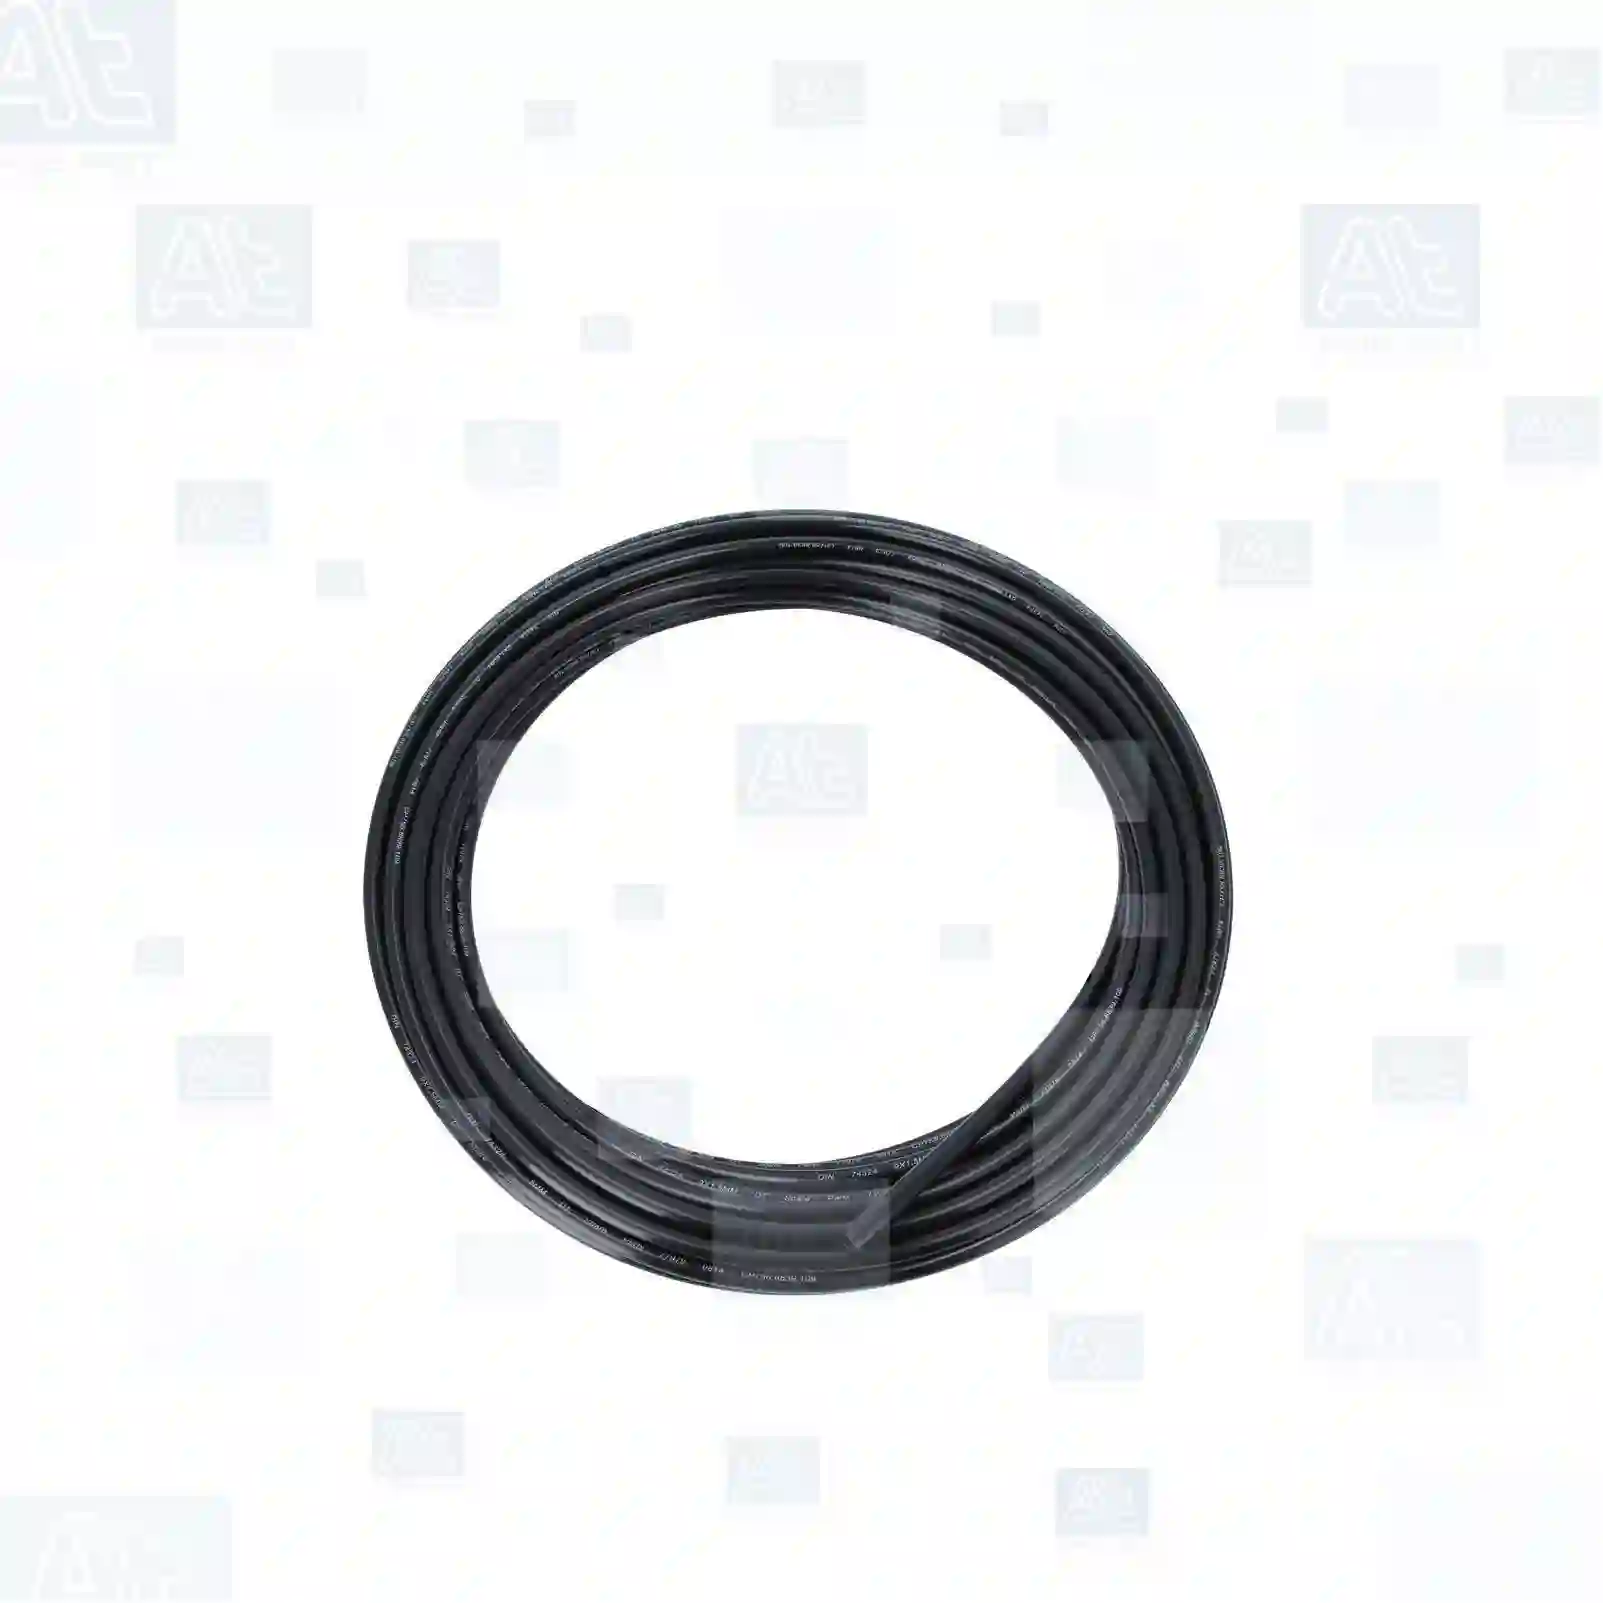 Nylon pipe, black, at no 77725443, oem no: 0799007, 1506266, 1519677, 1519678, 1519679, 799007, 04823128, 4823128, 98489307, L100264, L165407, 04351609206, 04351609606, 04351609706, 0009872627, 0089976082, 8282519176, 5001866436, 5689330048, 5689500416, 7400980831, 7700051804, 1483543, 1935150, 1935155, 2443492, 2660375, 813016, 6225917, 976133, 980831, 07W201755, ZG50530-0008 At Spare Part | Engine, Accelerator Pedal, Camshaft, Connecting Rod, Crankcase, Crankshaft, Cylinder Head, Engine Suspension Mountings, Exhaust Manifold, Exhaust Gas Recirculation, Filter Kits, Flywheel Housing, General Overhaul Kits, Engine, Intake Manifold, Oil Cleaner, Oil Cooler, Oil Filter, Oil Pump, Oil Sump, Piston & Liner, Sensor & Switch, Timing Case, Turbocharger, Cooling System, Belt Tensioner, Coolant Filter, Coolant Pipe, Corrosion Prevention Agent, Drive, Expansion Tank, Fan, Intercooler, Monitors & Gauges, Radiator, Thermostat, V-Belt / Timing belt, Water Pump, Fuel System, Electronical Injector Unit, Feed Pump, Fuel Filter, cpl., Fuel Gauge Sender,  Fuel Line, Fuel Pump, Fuel Tank, Injection Line Kit, Injection Pump, Exhaust System, Clutch & Pedal, Gearbox, Propeller Shaft, Axles, Brake System, Hubs & Wheels, Suspension, Leaf Spring, Universal Parts / Accessories, Steering, Electrical System, Cabin Nylon pipe, black, at no 77725443, oem no: 0799007, 1506266, 1519677, 1519678, 1519679, 799007, 04823128, 4823128, 98489307, L100264, L165407, 04351609206, 04351609606, 04351609706, 0009872627, 0089976082, 8282519176, 5001866436, 5689330048, 5689500416, 7400980831, 7700051804, 1483543, 1935150, 1935155, 2443492, 2660375, 813016, 6225917, 976133, 980831, 07W201755, ZG50530-0008 At Spare Part | Engine, Accelerator Pedal, Camshaft, Connecting Rod, Crankcase, Crankshaft, Cylinder Head, Engine Suspension Mountings, Exhaust Manifold, Exhaust Gas Recirculation, Filter Kits, Flywheel Housing, General Overhaul Kits, Engine, Intake Manifold, Oil Cleaner, Oil Cooler, Oil Filter, Oil Pump, Oil Sump, Piston & Liner, Sensor & Switch, Timing Case, Turbocharger, Cooling System, Belt Tensioner, Coolant Filter, Coolant Pipe, Corrosion Prevention Agent, Drive, Expansion Tank, Fan, Intercooler, Monitors & Gauges, Radiator, Thermostat, V-Belt / Timing belt, Water Pump, Fuel System, Electronical Injector Unit, Feed Pump, Fuel Filter, cpl., Fuel Gauge Sender,  Fuel Line, Fuel Pump, Fuel Tank, Injection Line Kit, Injection Pump, Exhaust System, Clutch & Pedal, Gearbox, Propeller Shaft, Axles, Brake System, Hubs & Wheels, Suspension, Leaf Spring, Universal Parts / Accessories, Steering, Electrical System, Cabin